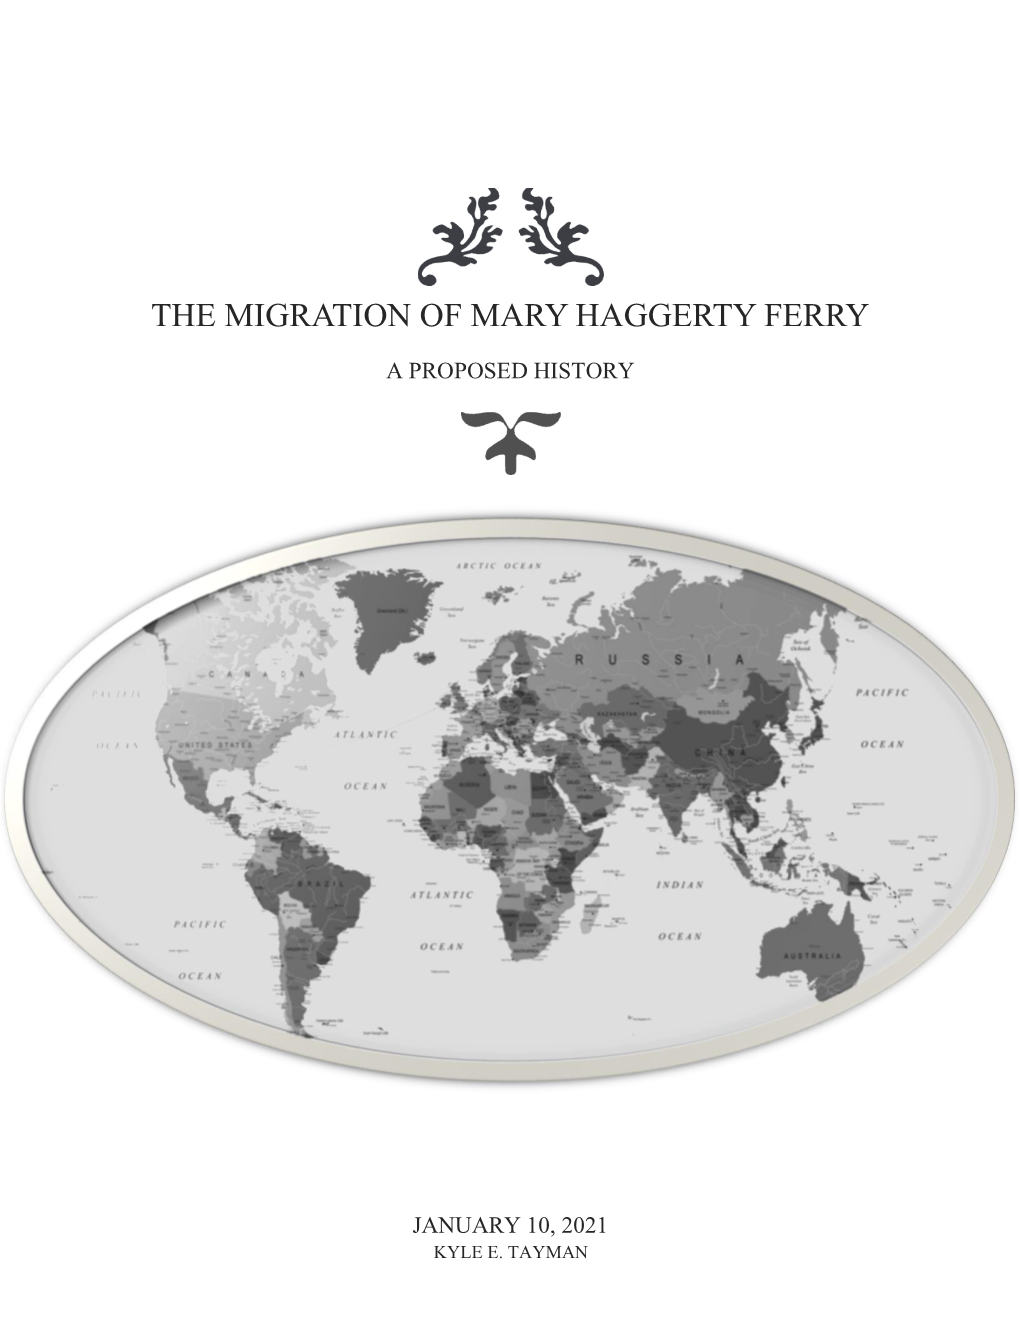 The Migration of Mary Haggerty Ferry